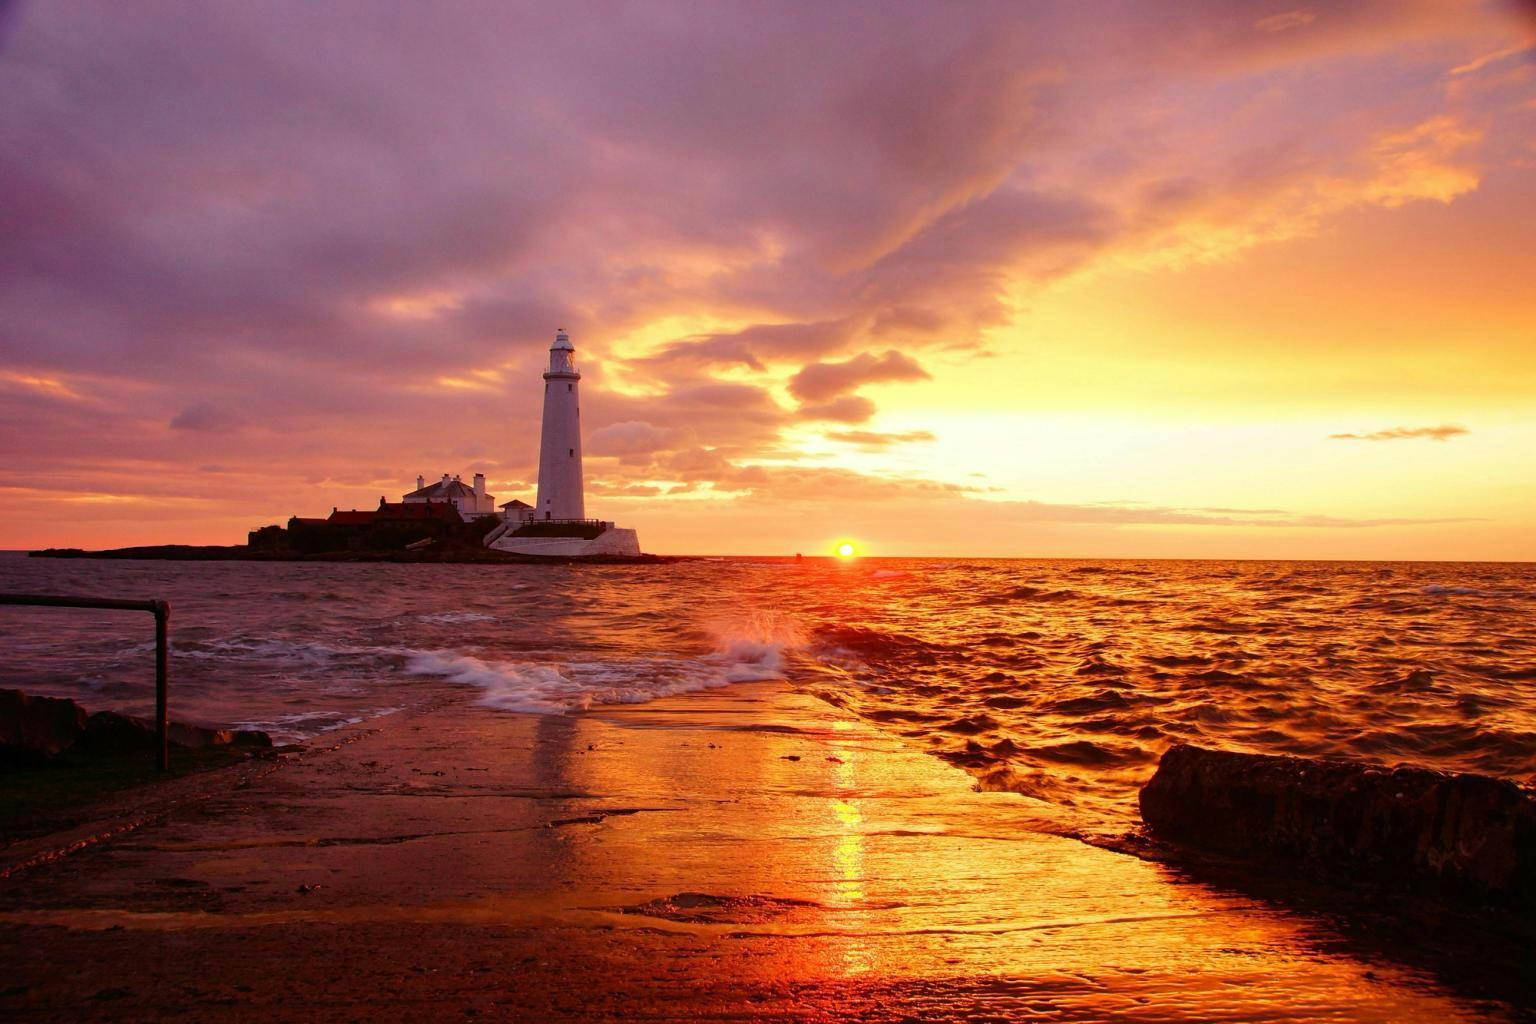 A lighthouse with an orange sunset sites on a small island 